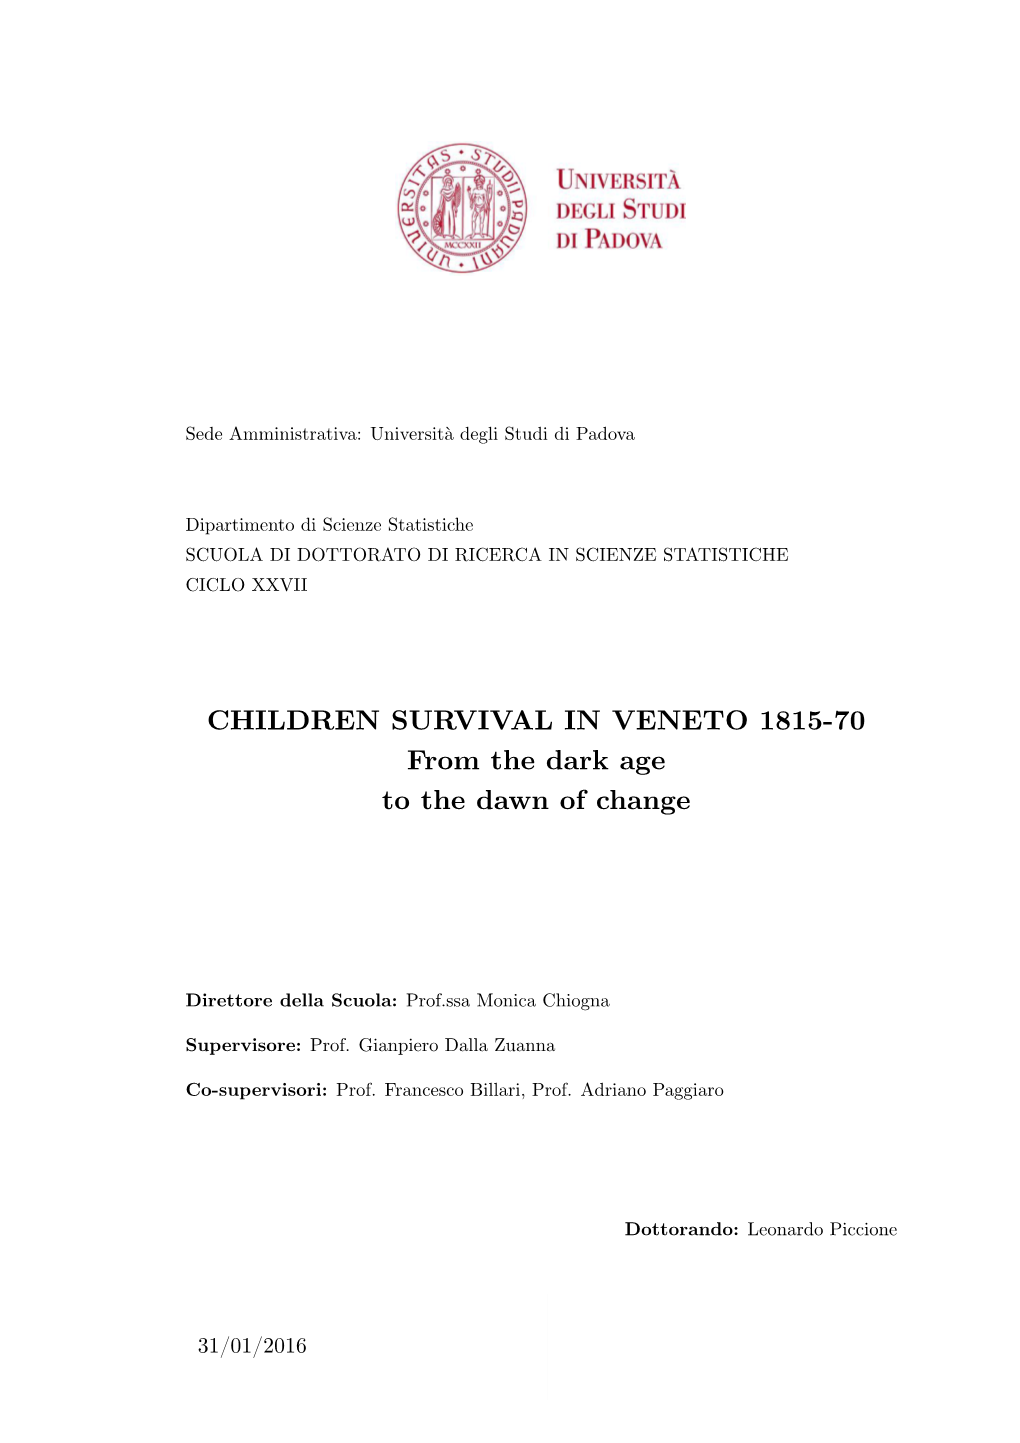 Children Survival in Veneto 1815-70. from the Dark Age to the Dawn of Change